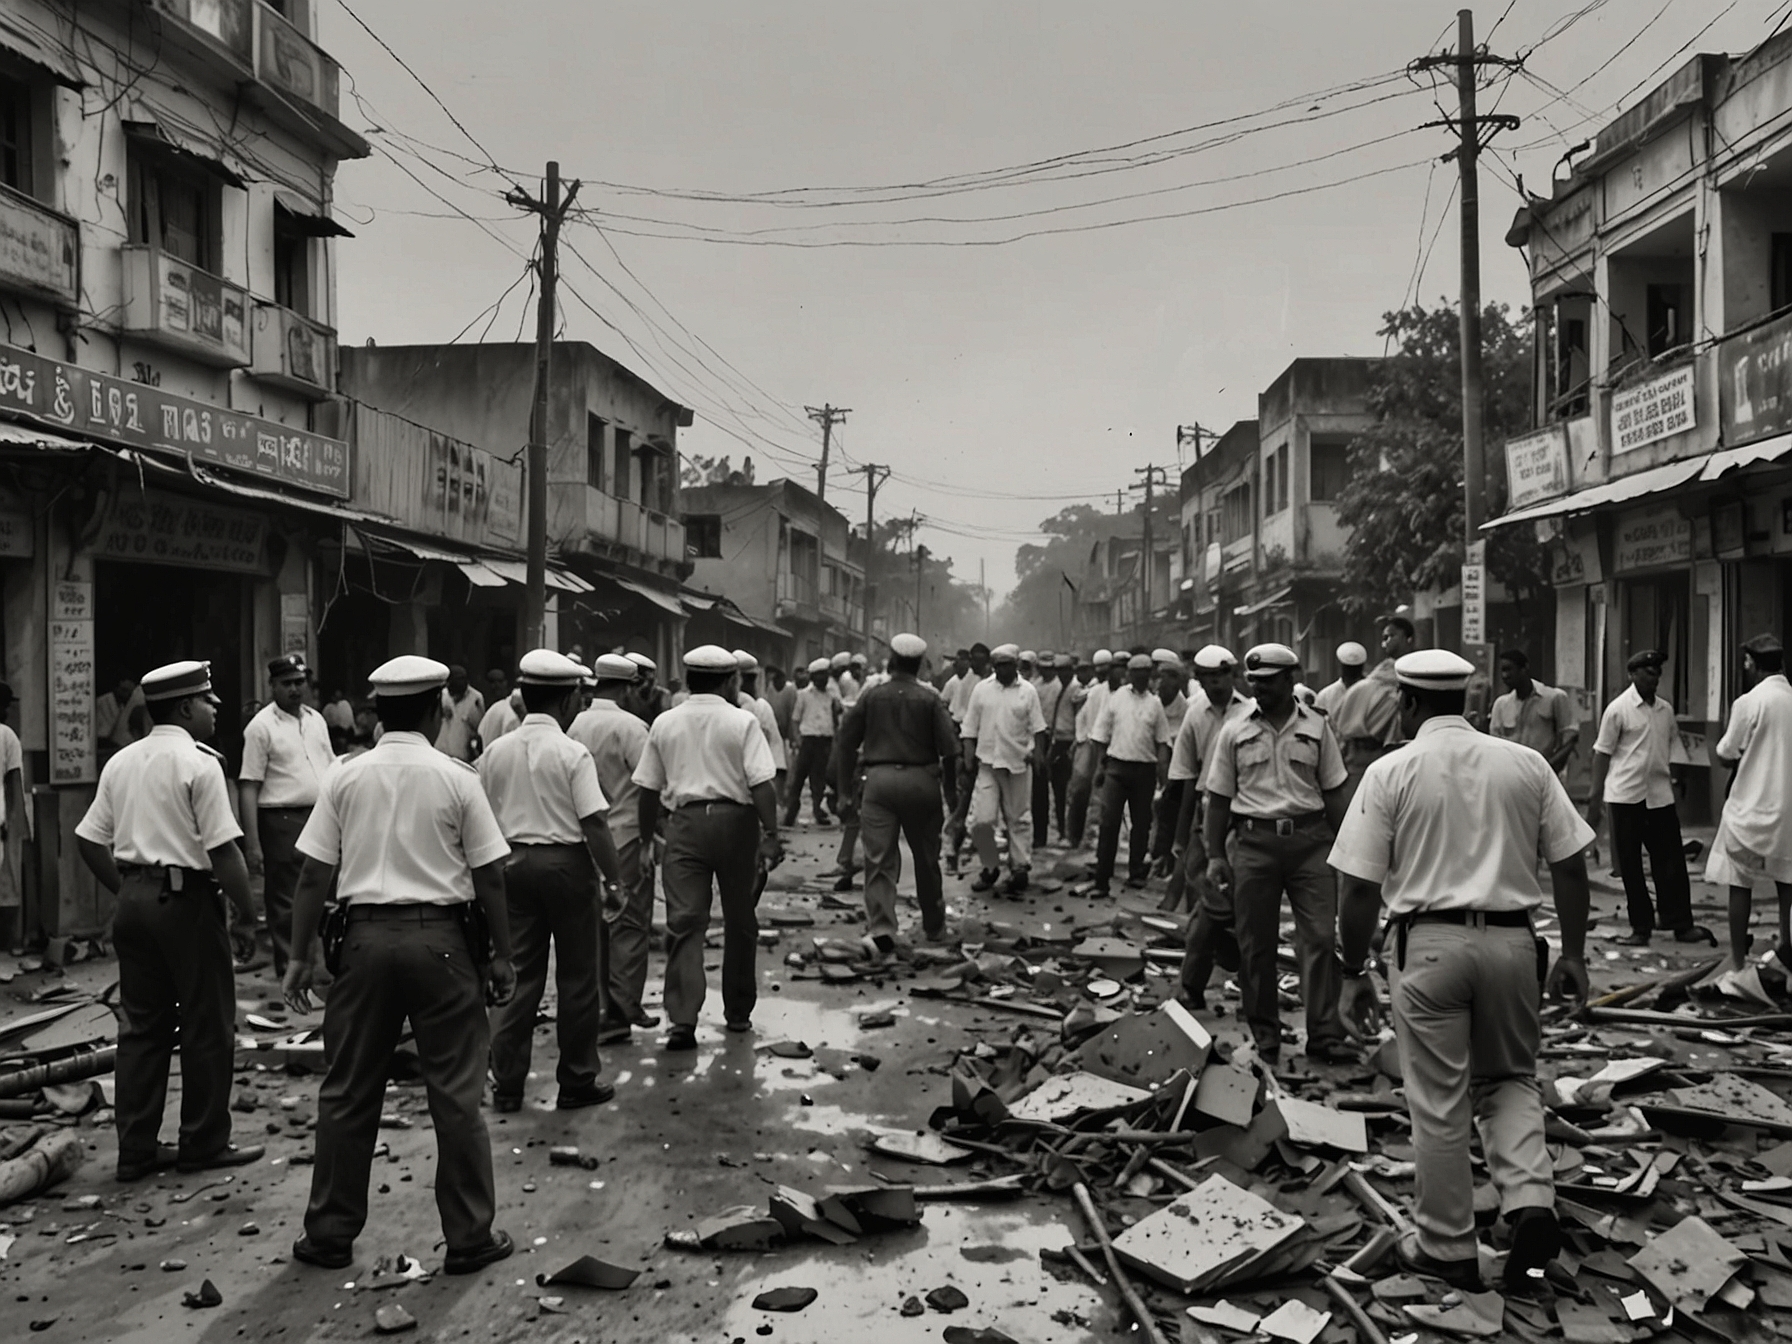 A chaotic scene in Bhupatinagar, East Midnapore, depicting the aftermath of the alleged attack on the Trinamool Congress booth leader with police officers examining the area.